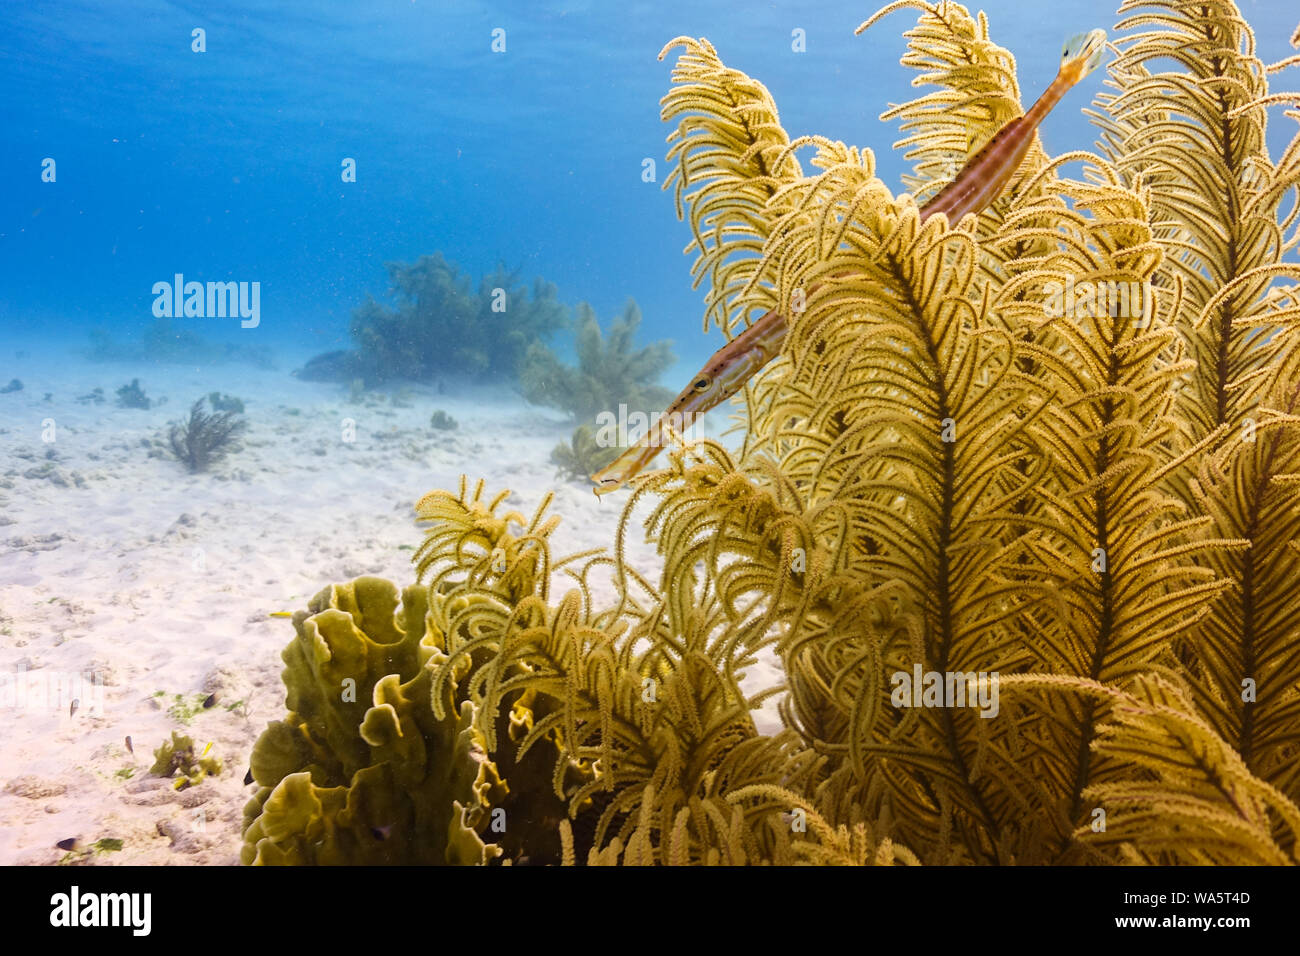 A trumpet fish hides among soft coral in the waters off the island of Bonaire in the Caribbean Sea Stock Photo